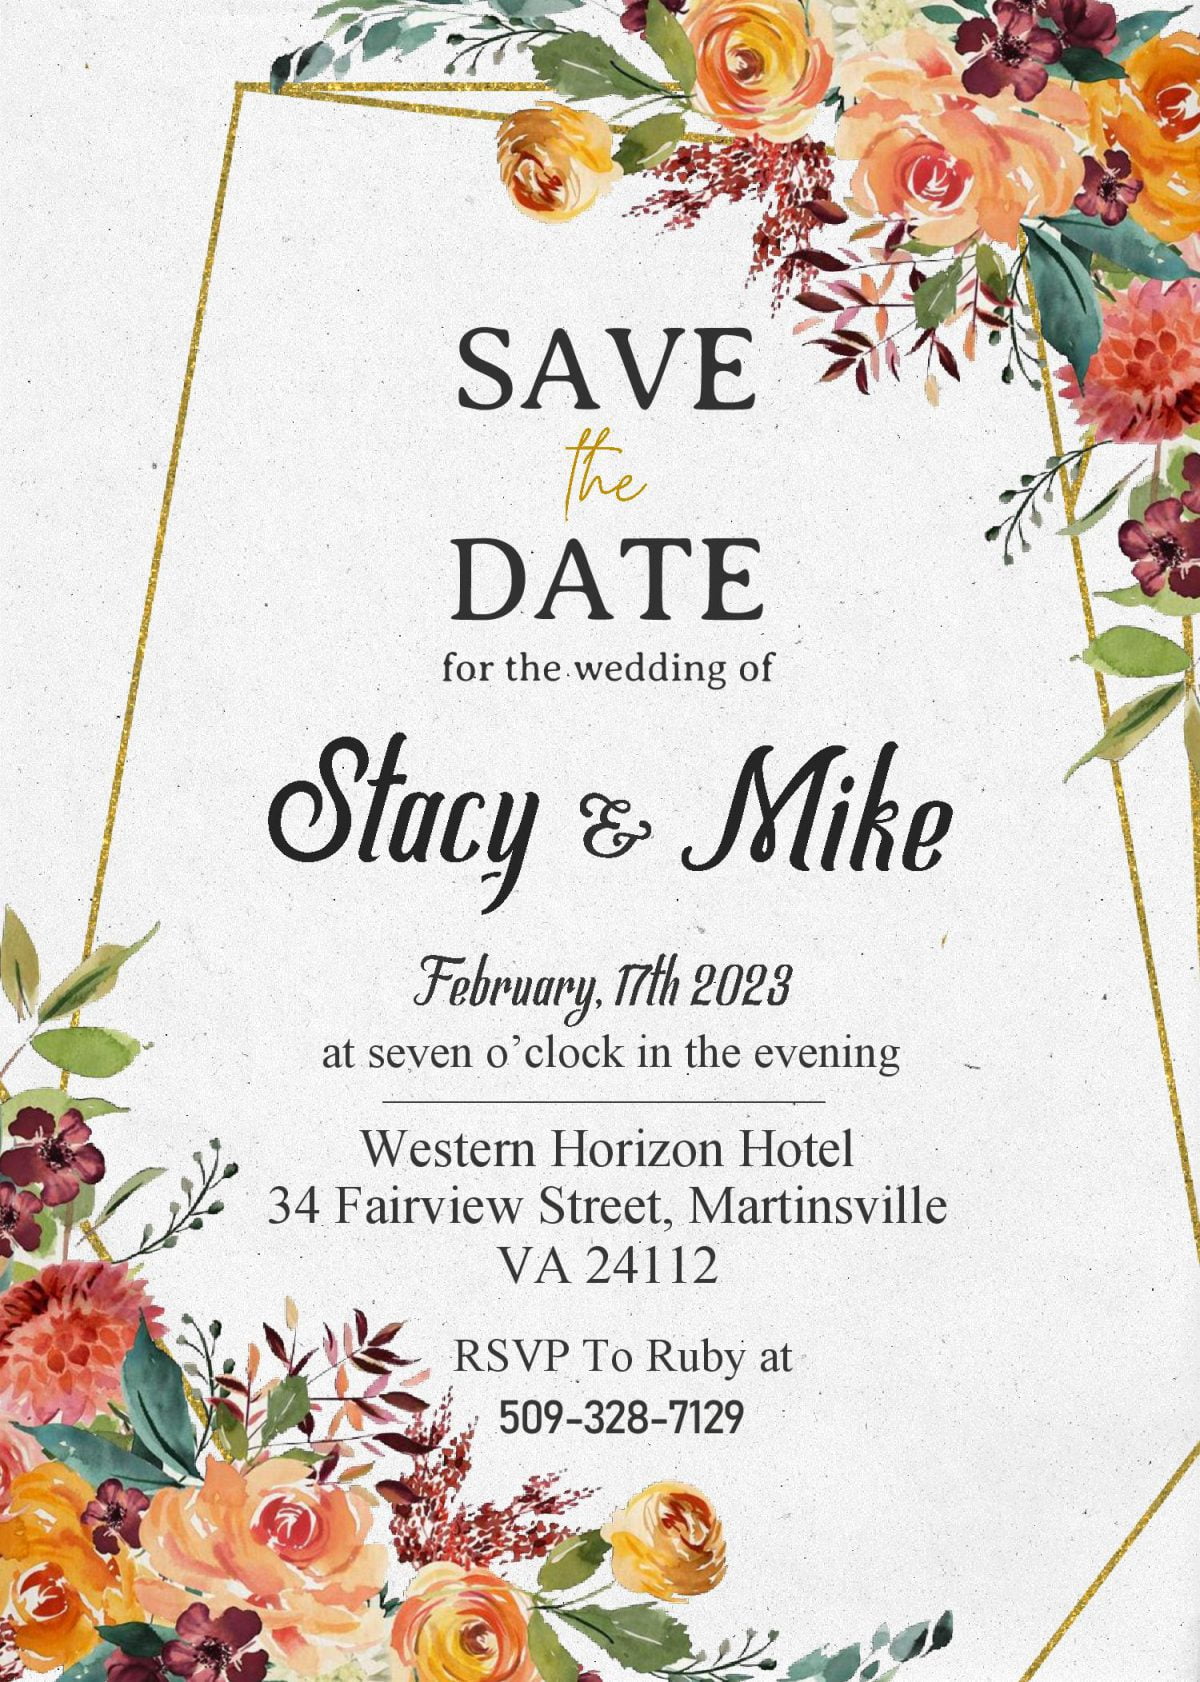 Save The Date Invitation Templates - Editable With MS Word and has watercolor floral